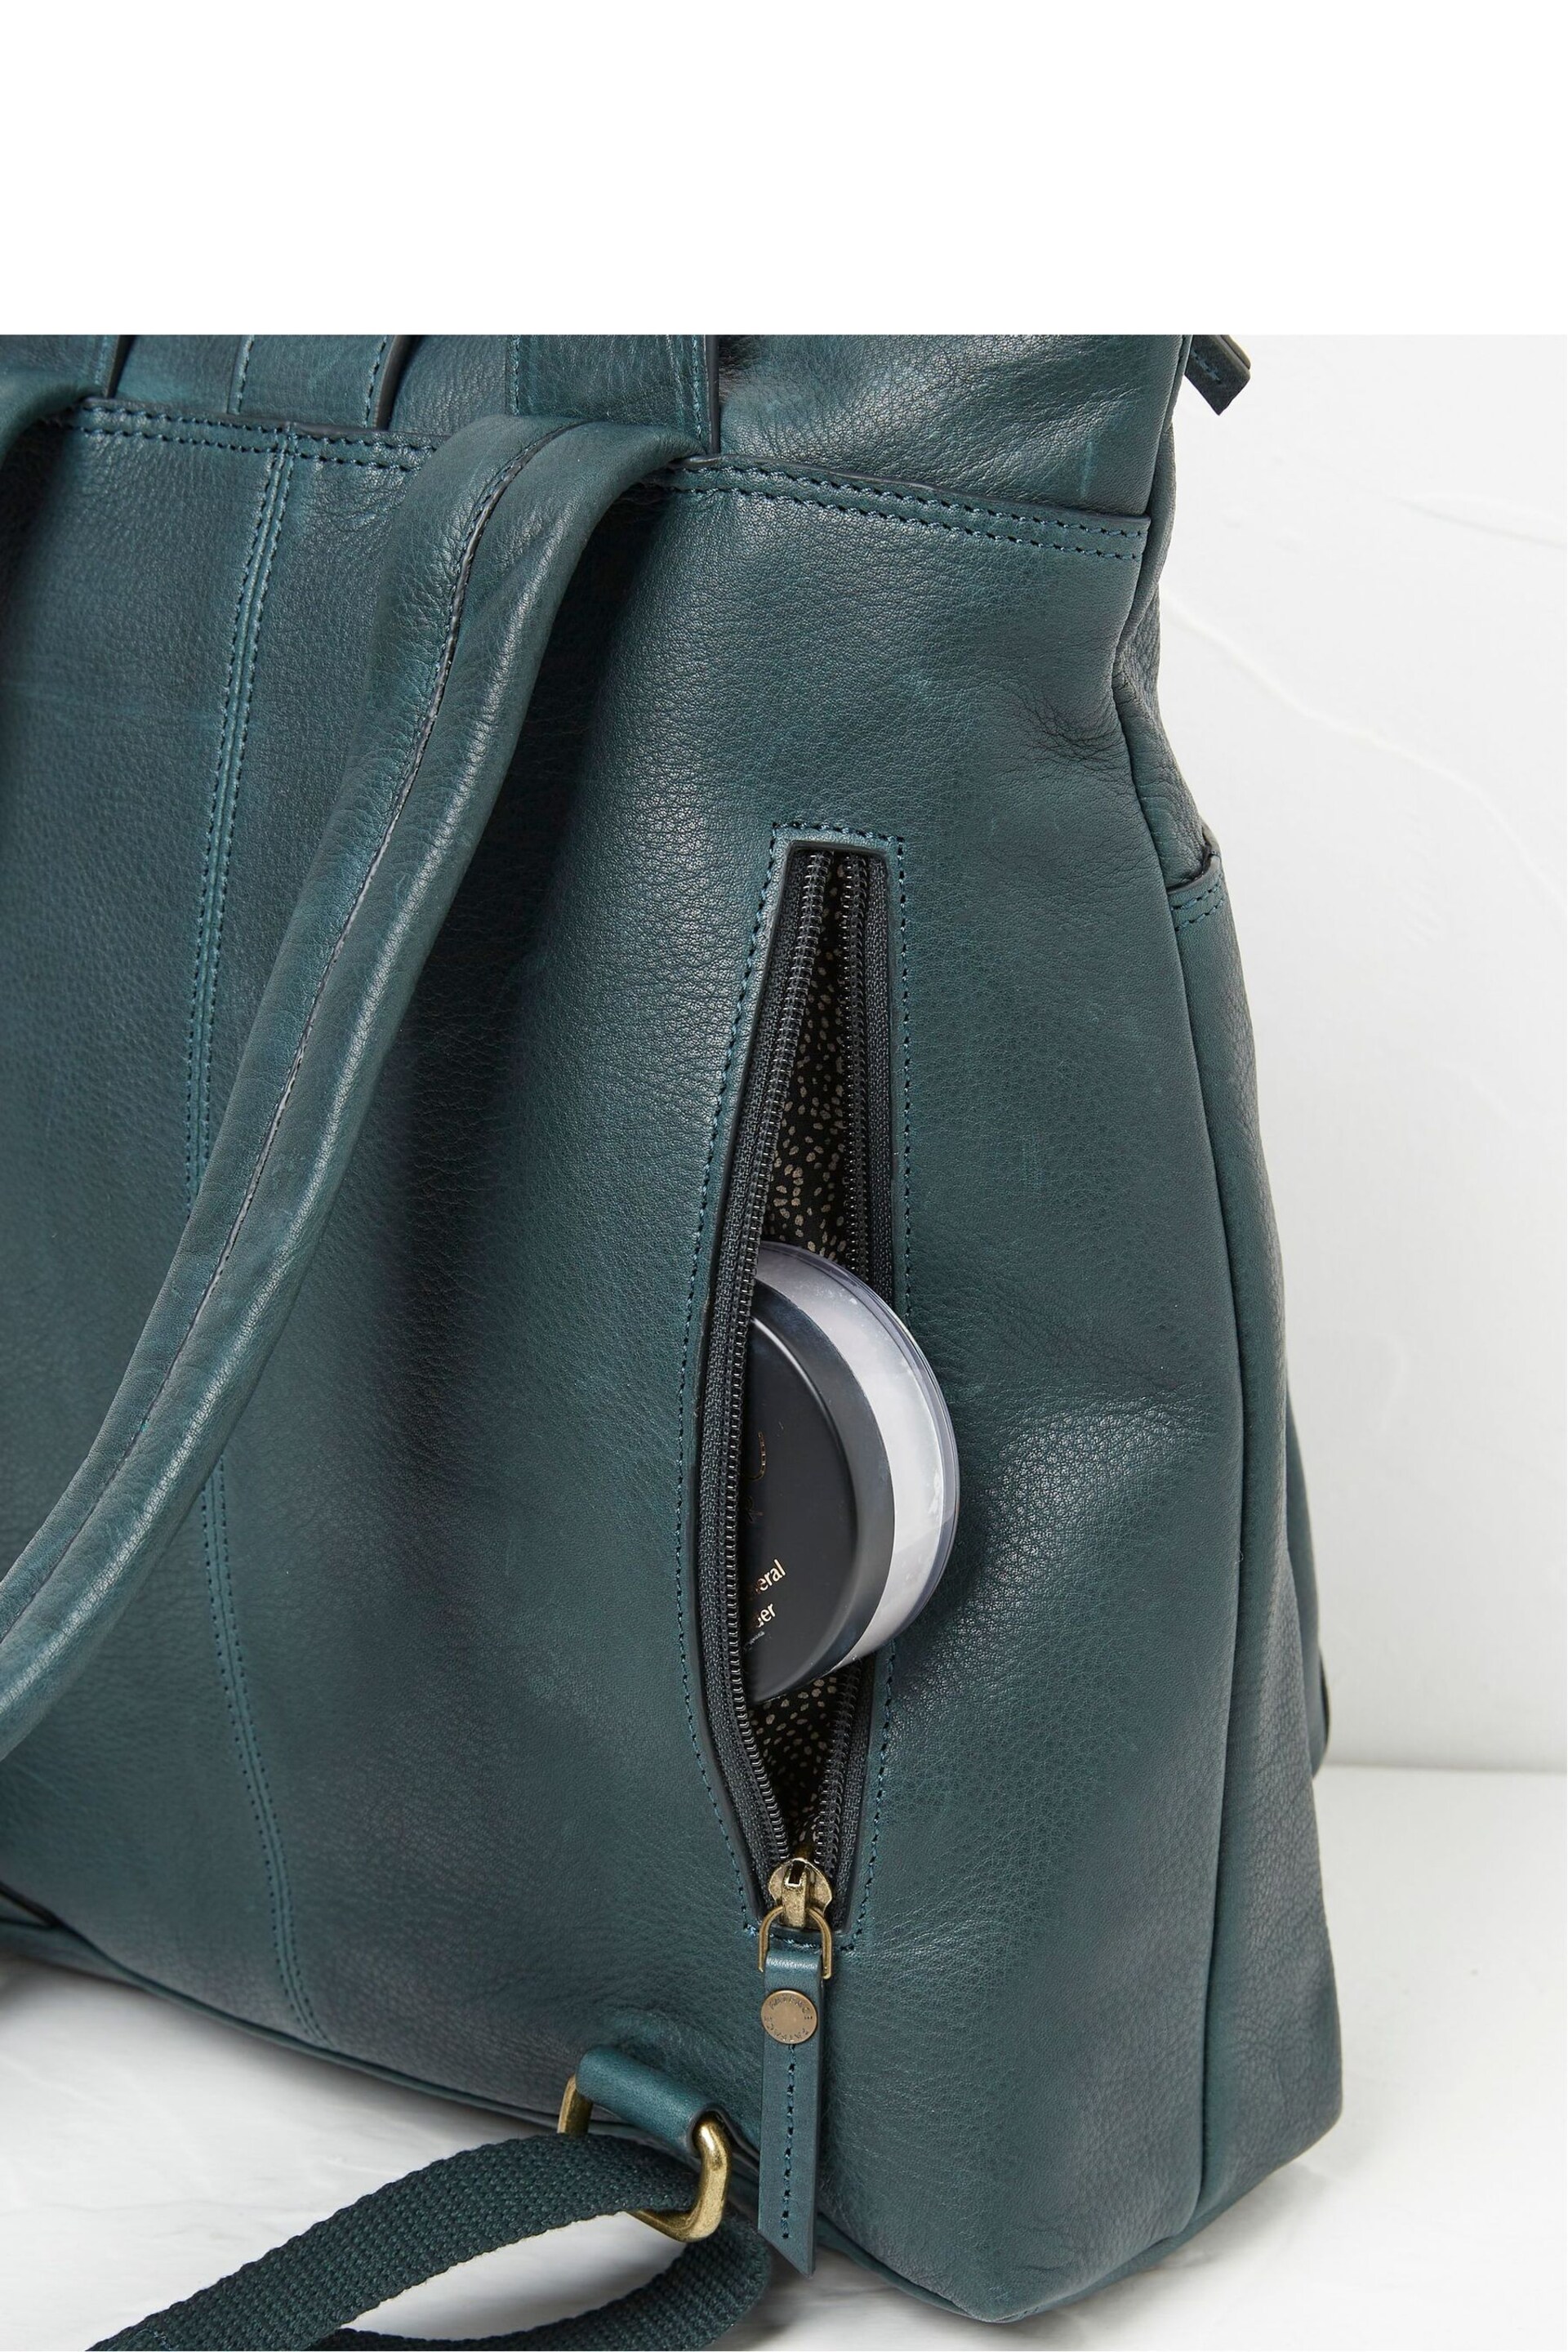 FatFace Blue The Ava Backpack - Image 5 of 5